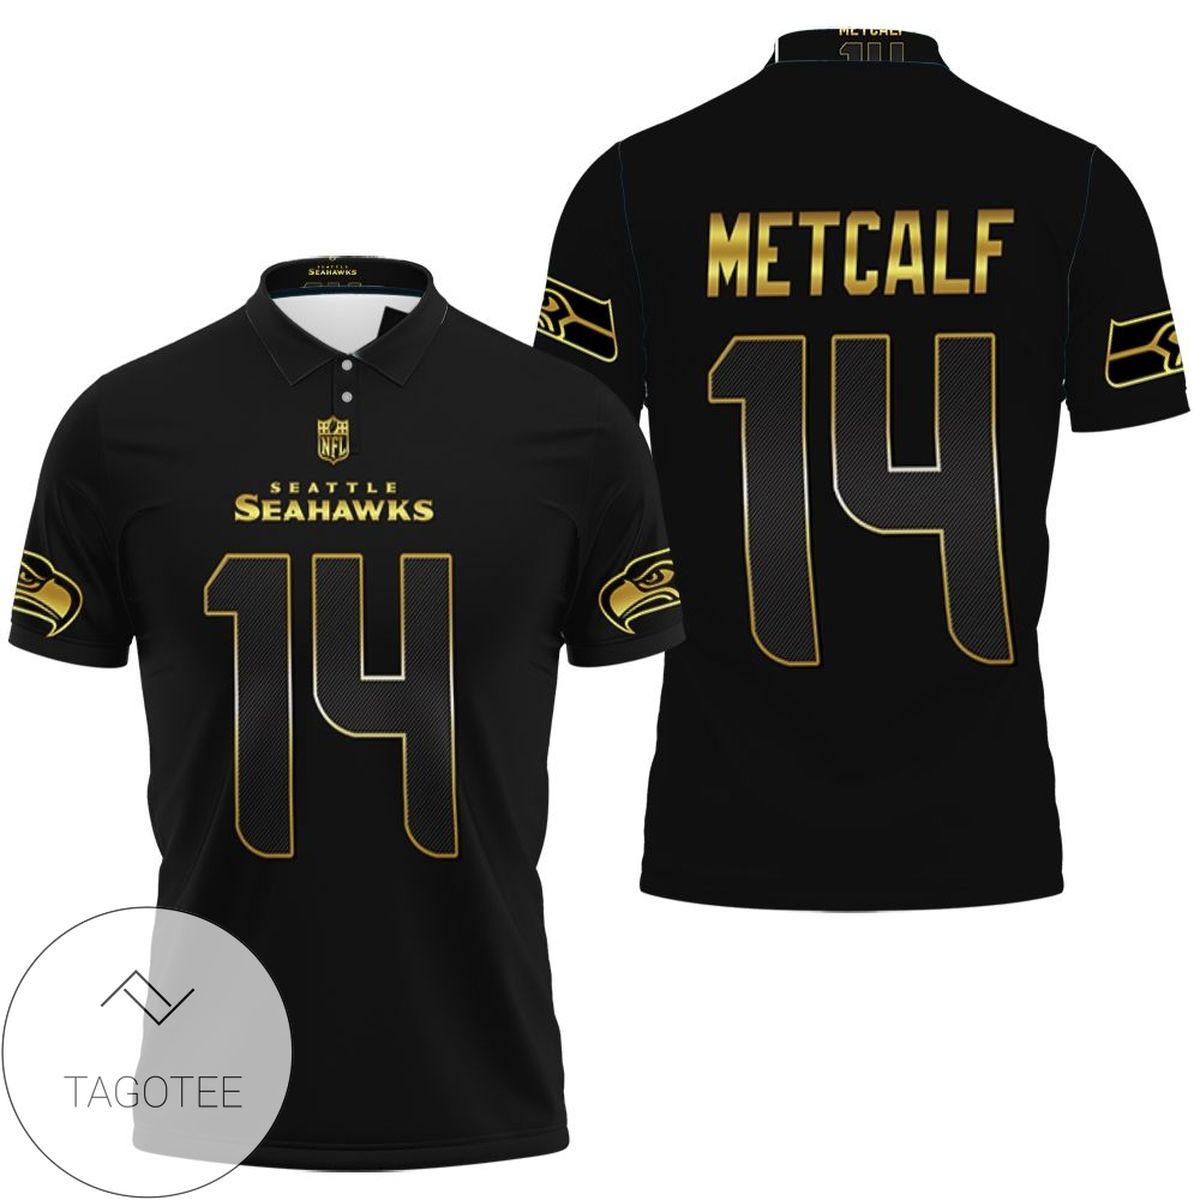 Seattle Seahawks Dk Metcalf #14 Nfl American Football Team Black Golden Edition 3d Designed Allover Gift For Seattle Fans All Over Print Polo Shirt